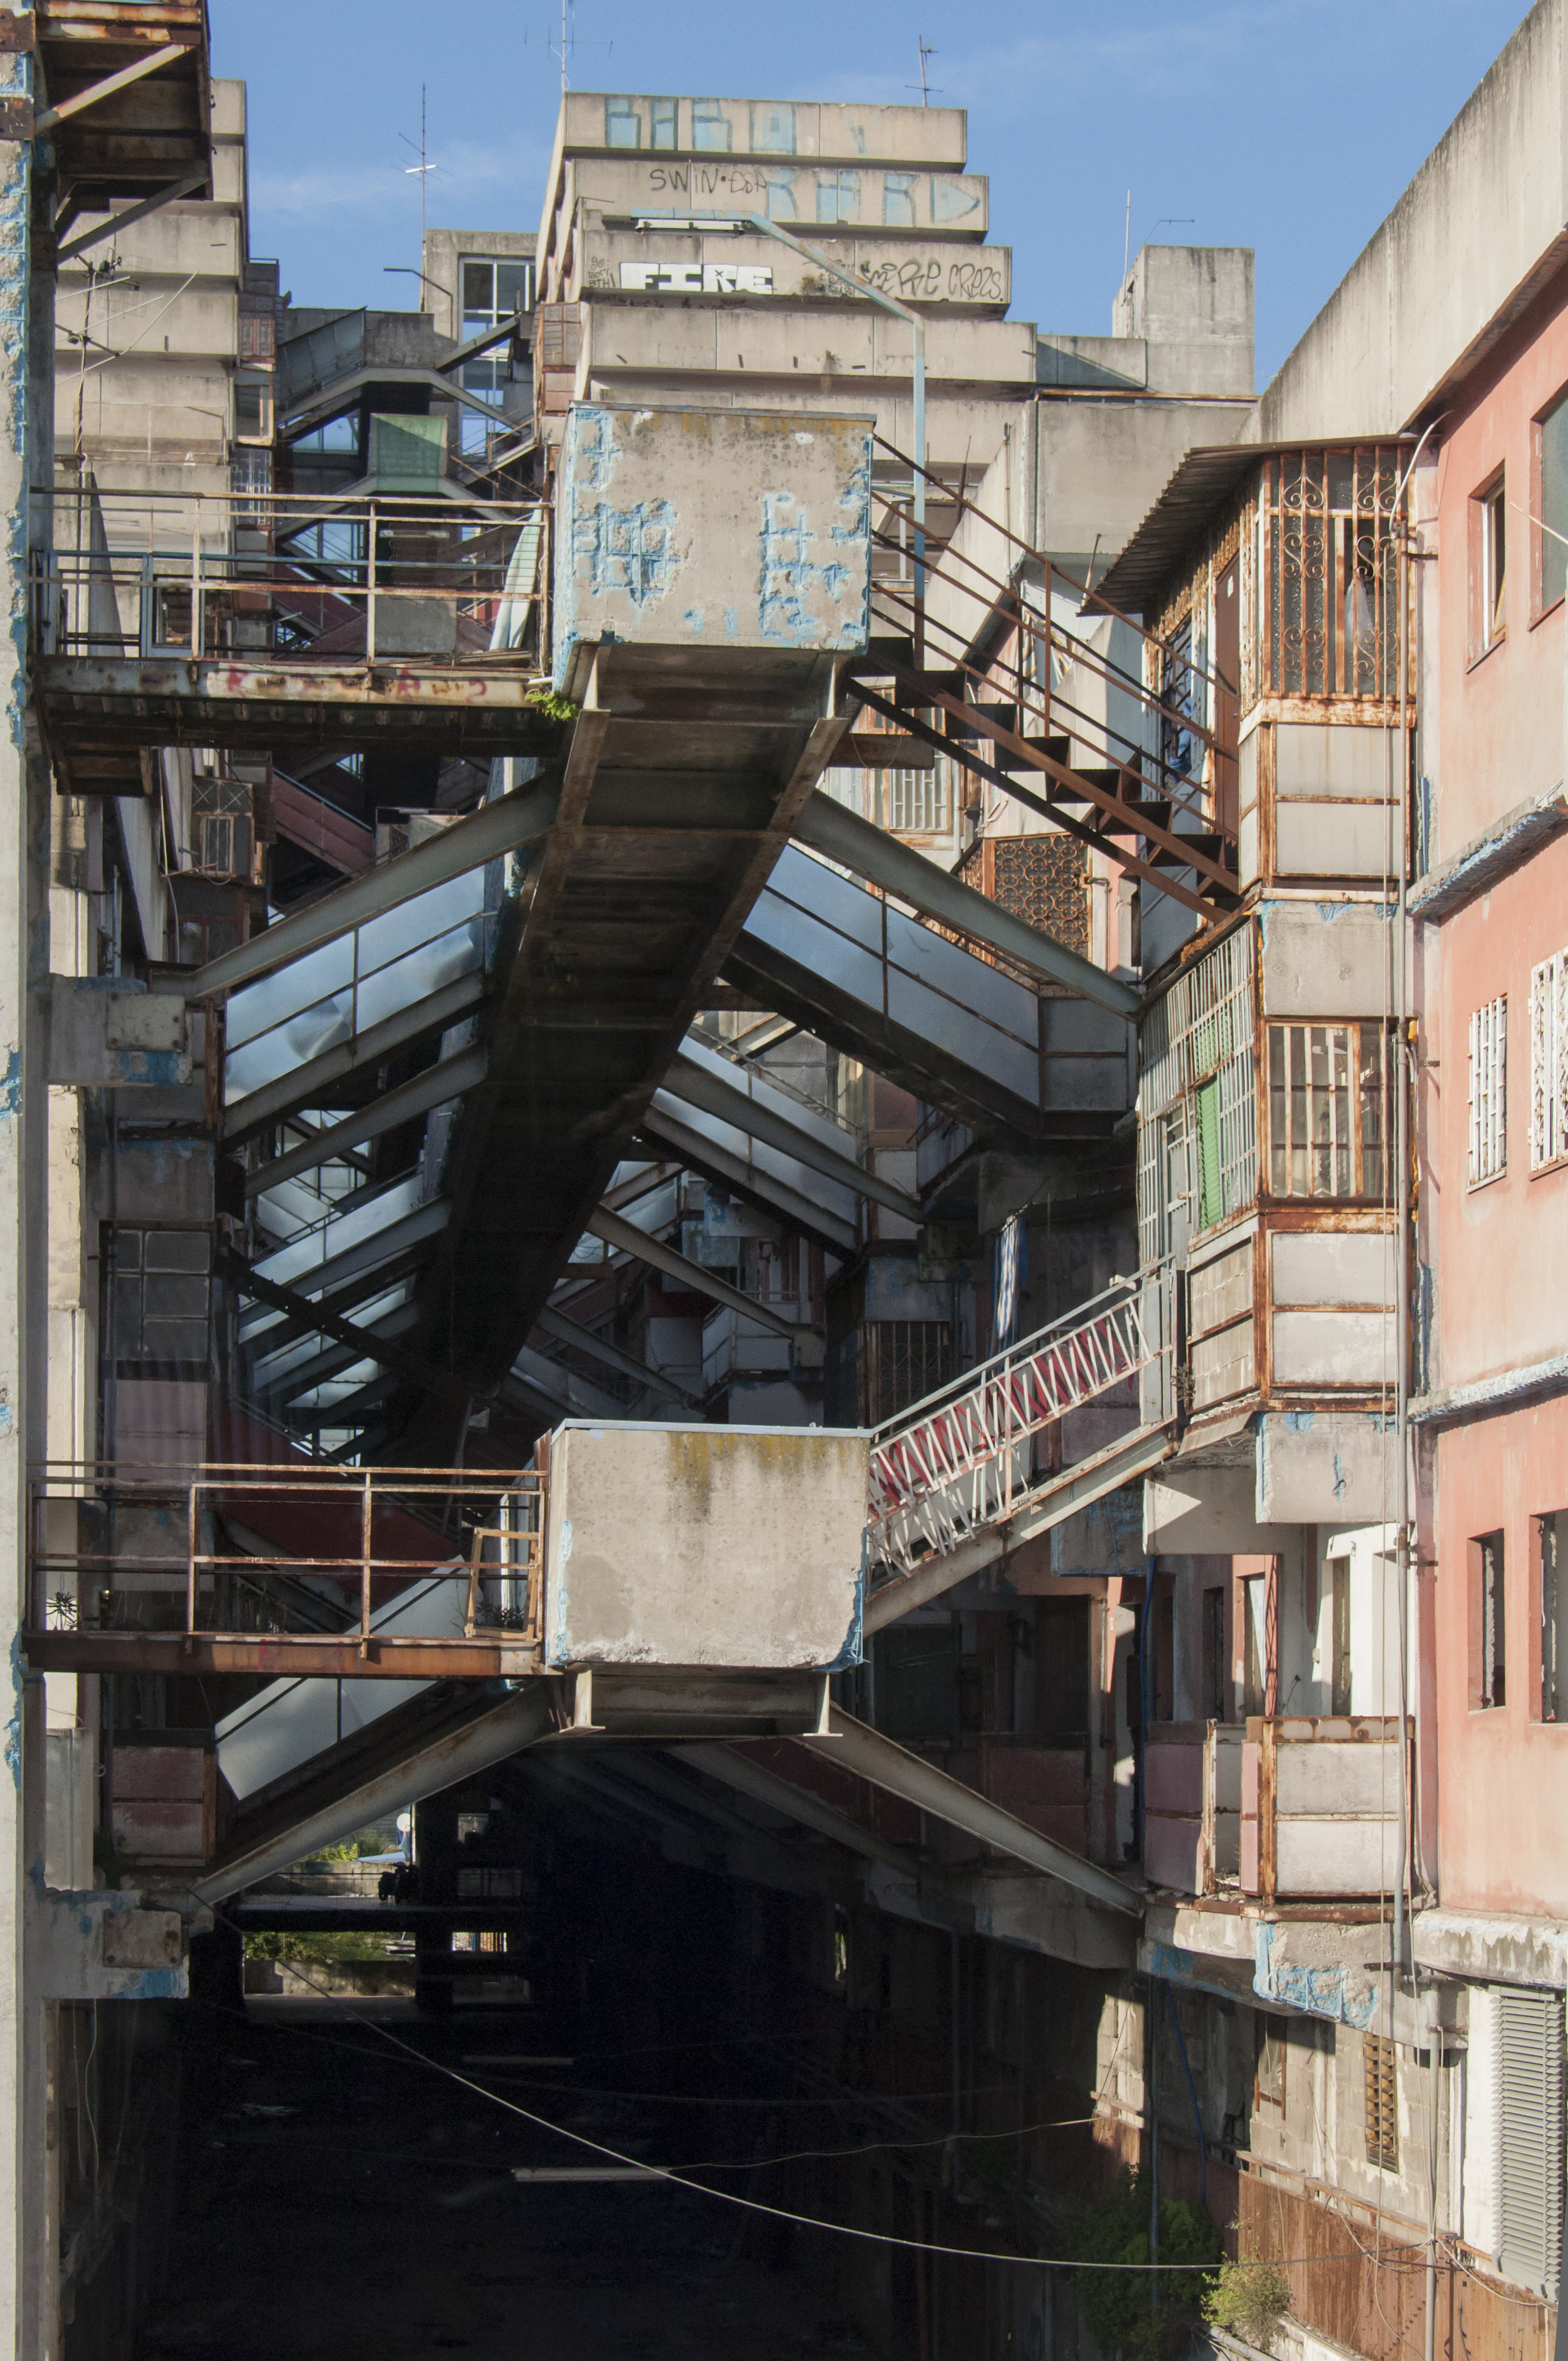 The intricate connecting stairs. Details of the Sails of Scampia in the Secondigliano district. Naples, Italy.